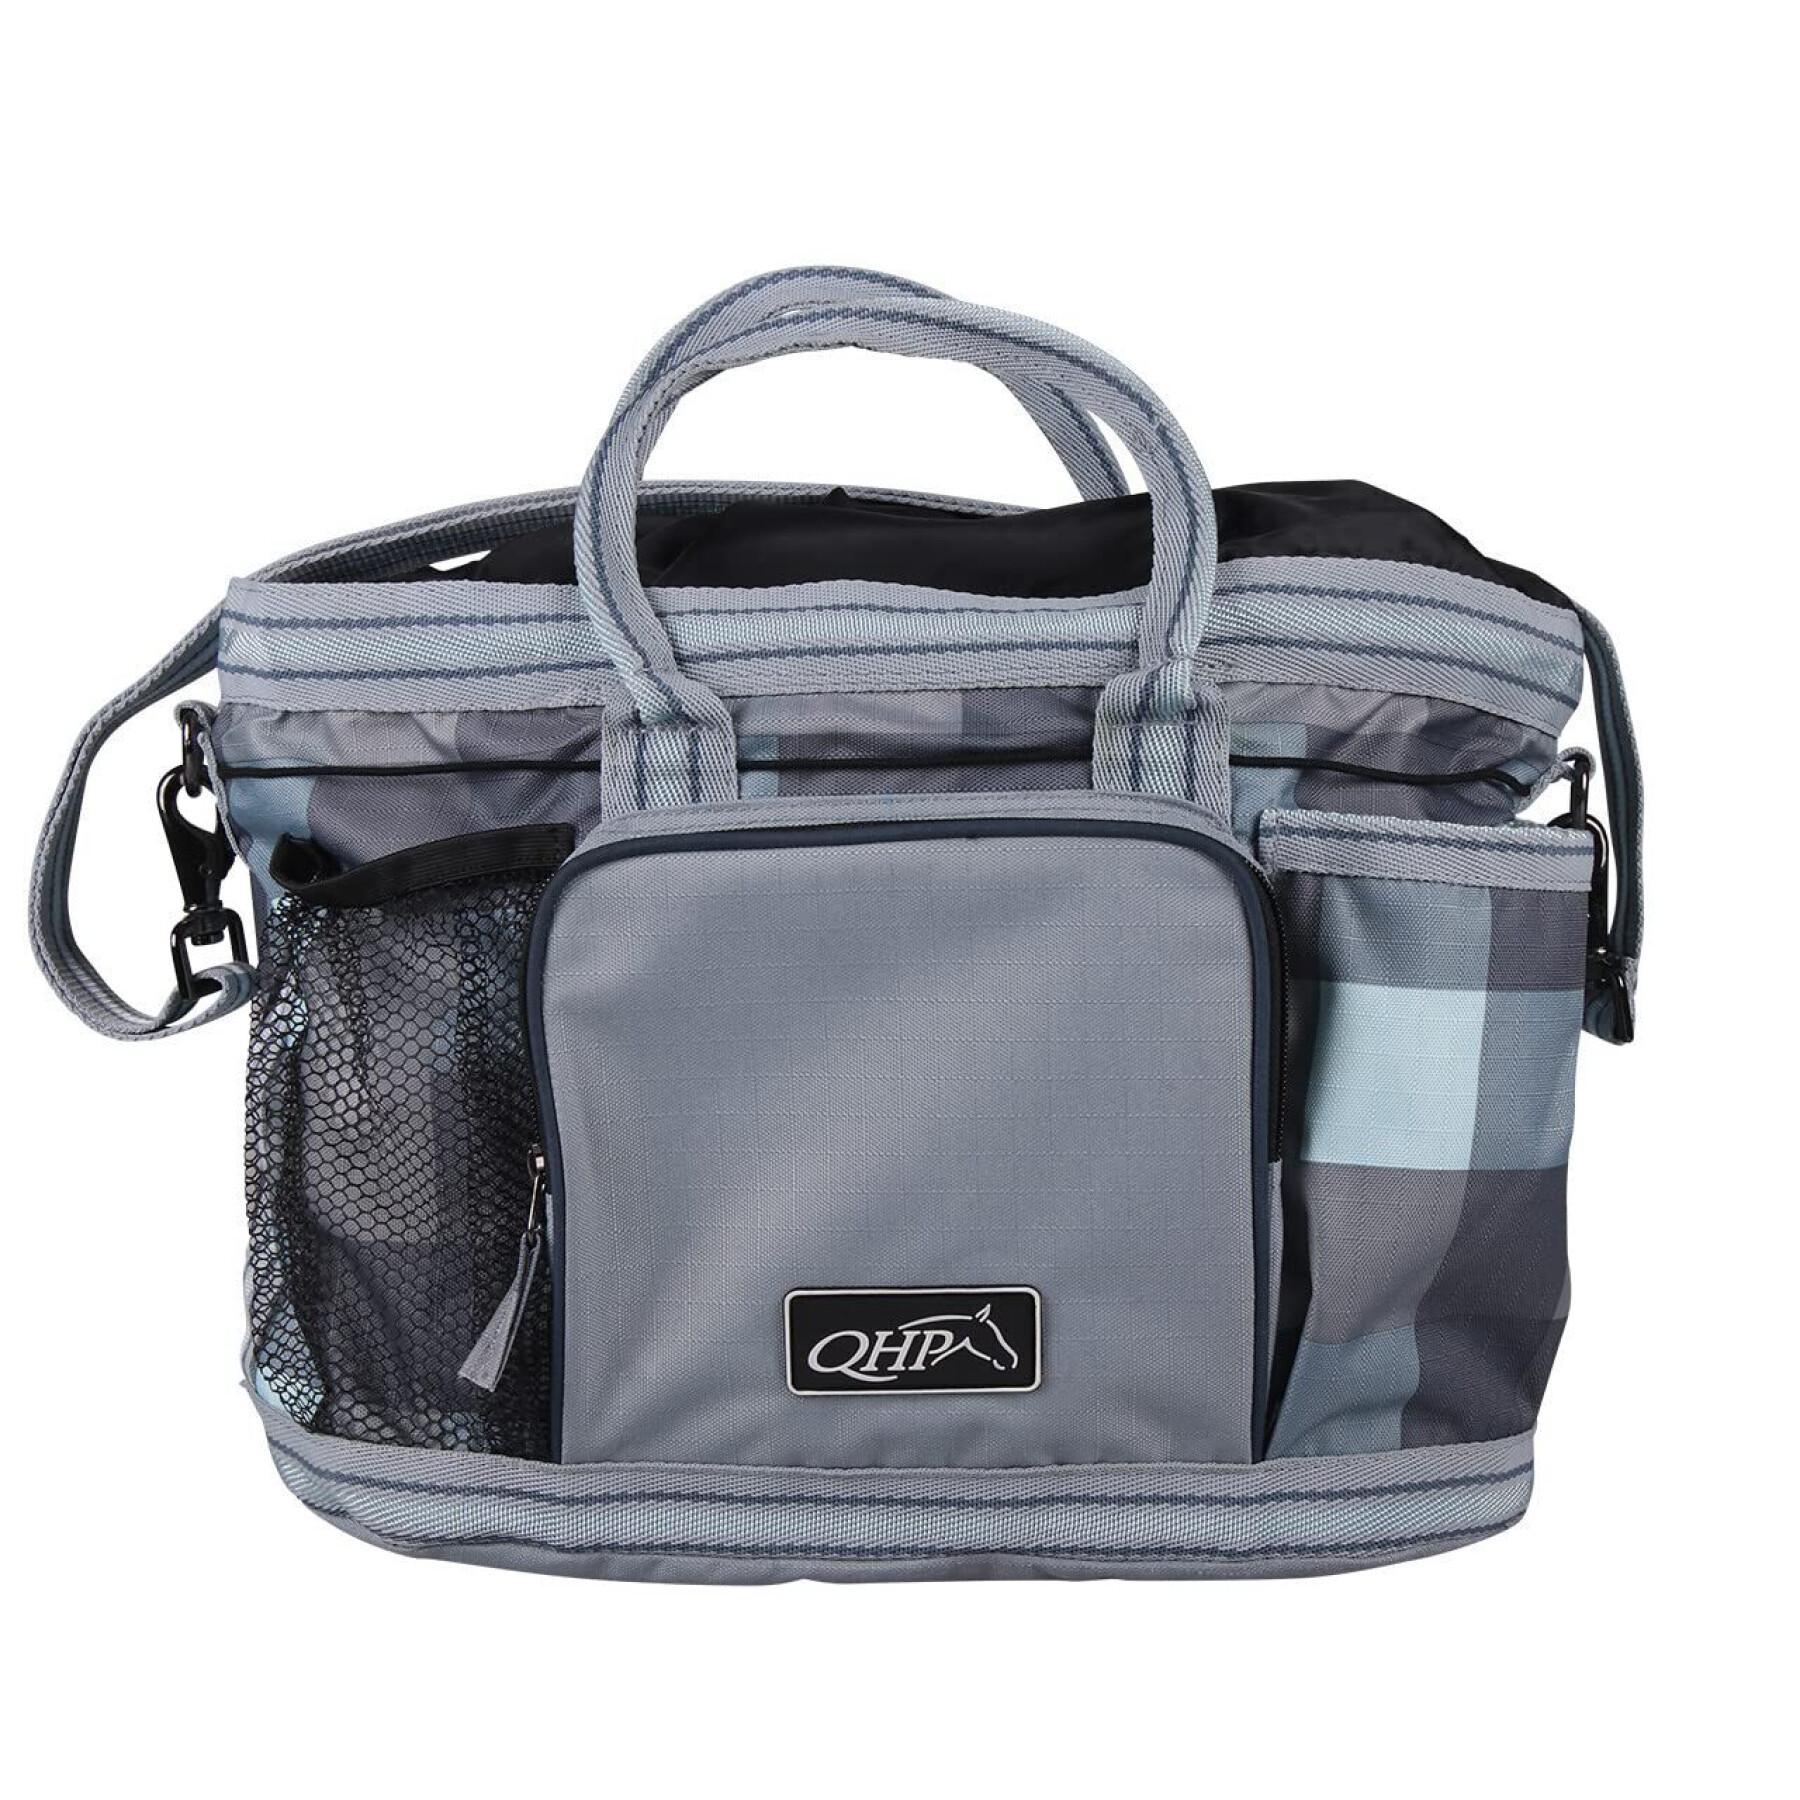 Grooming bag collection QHP